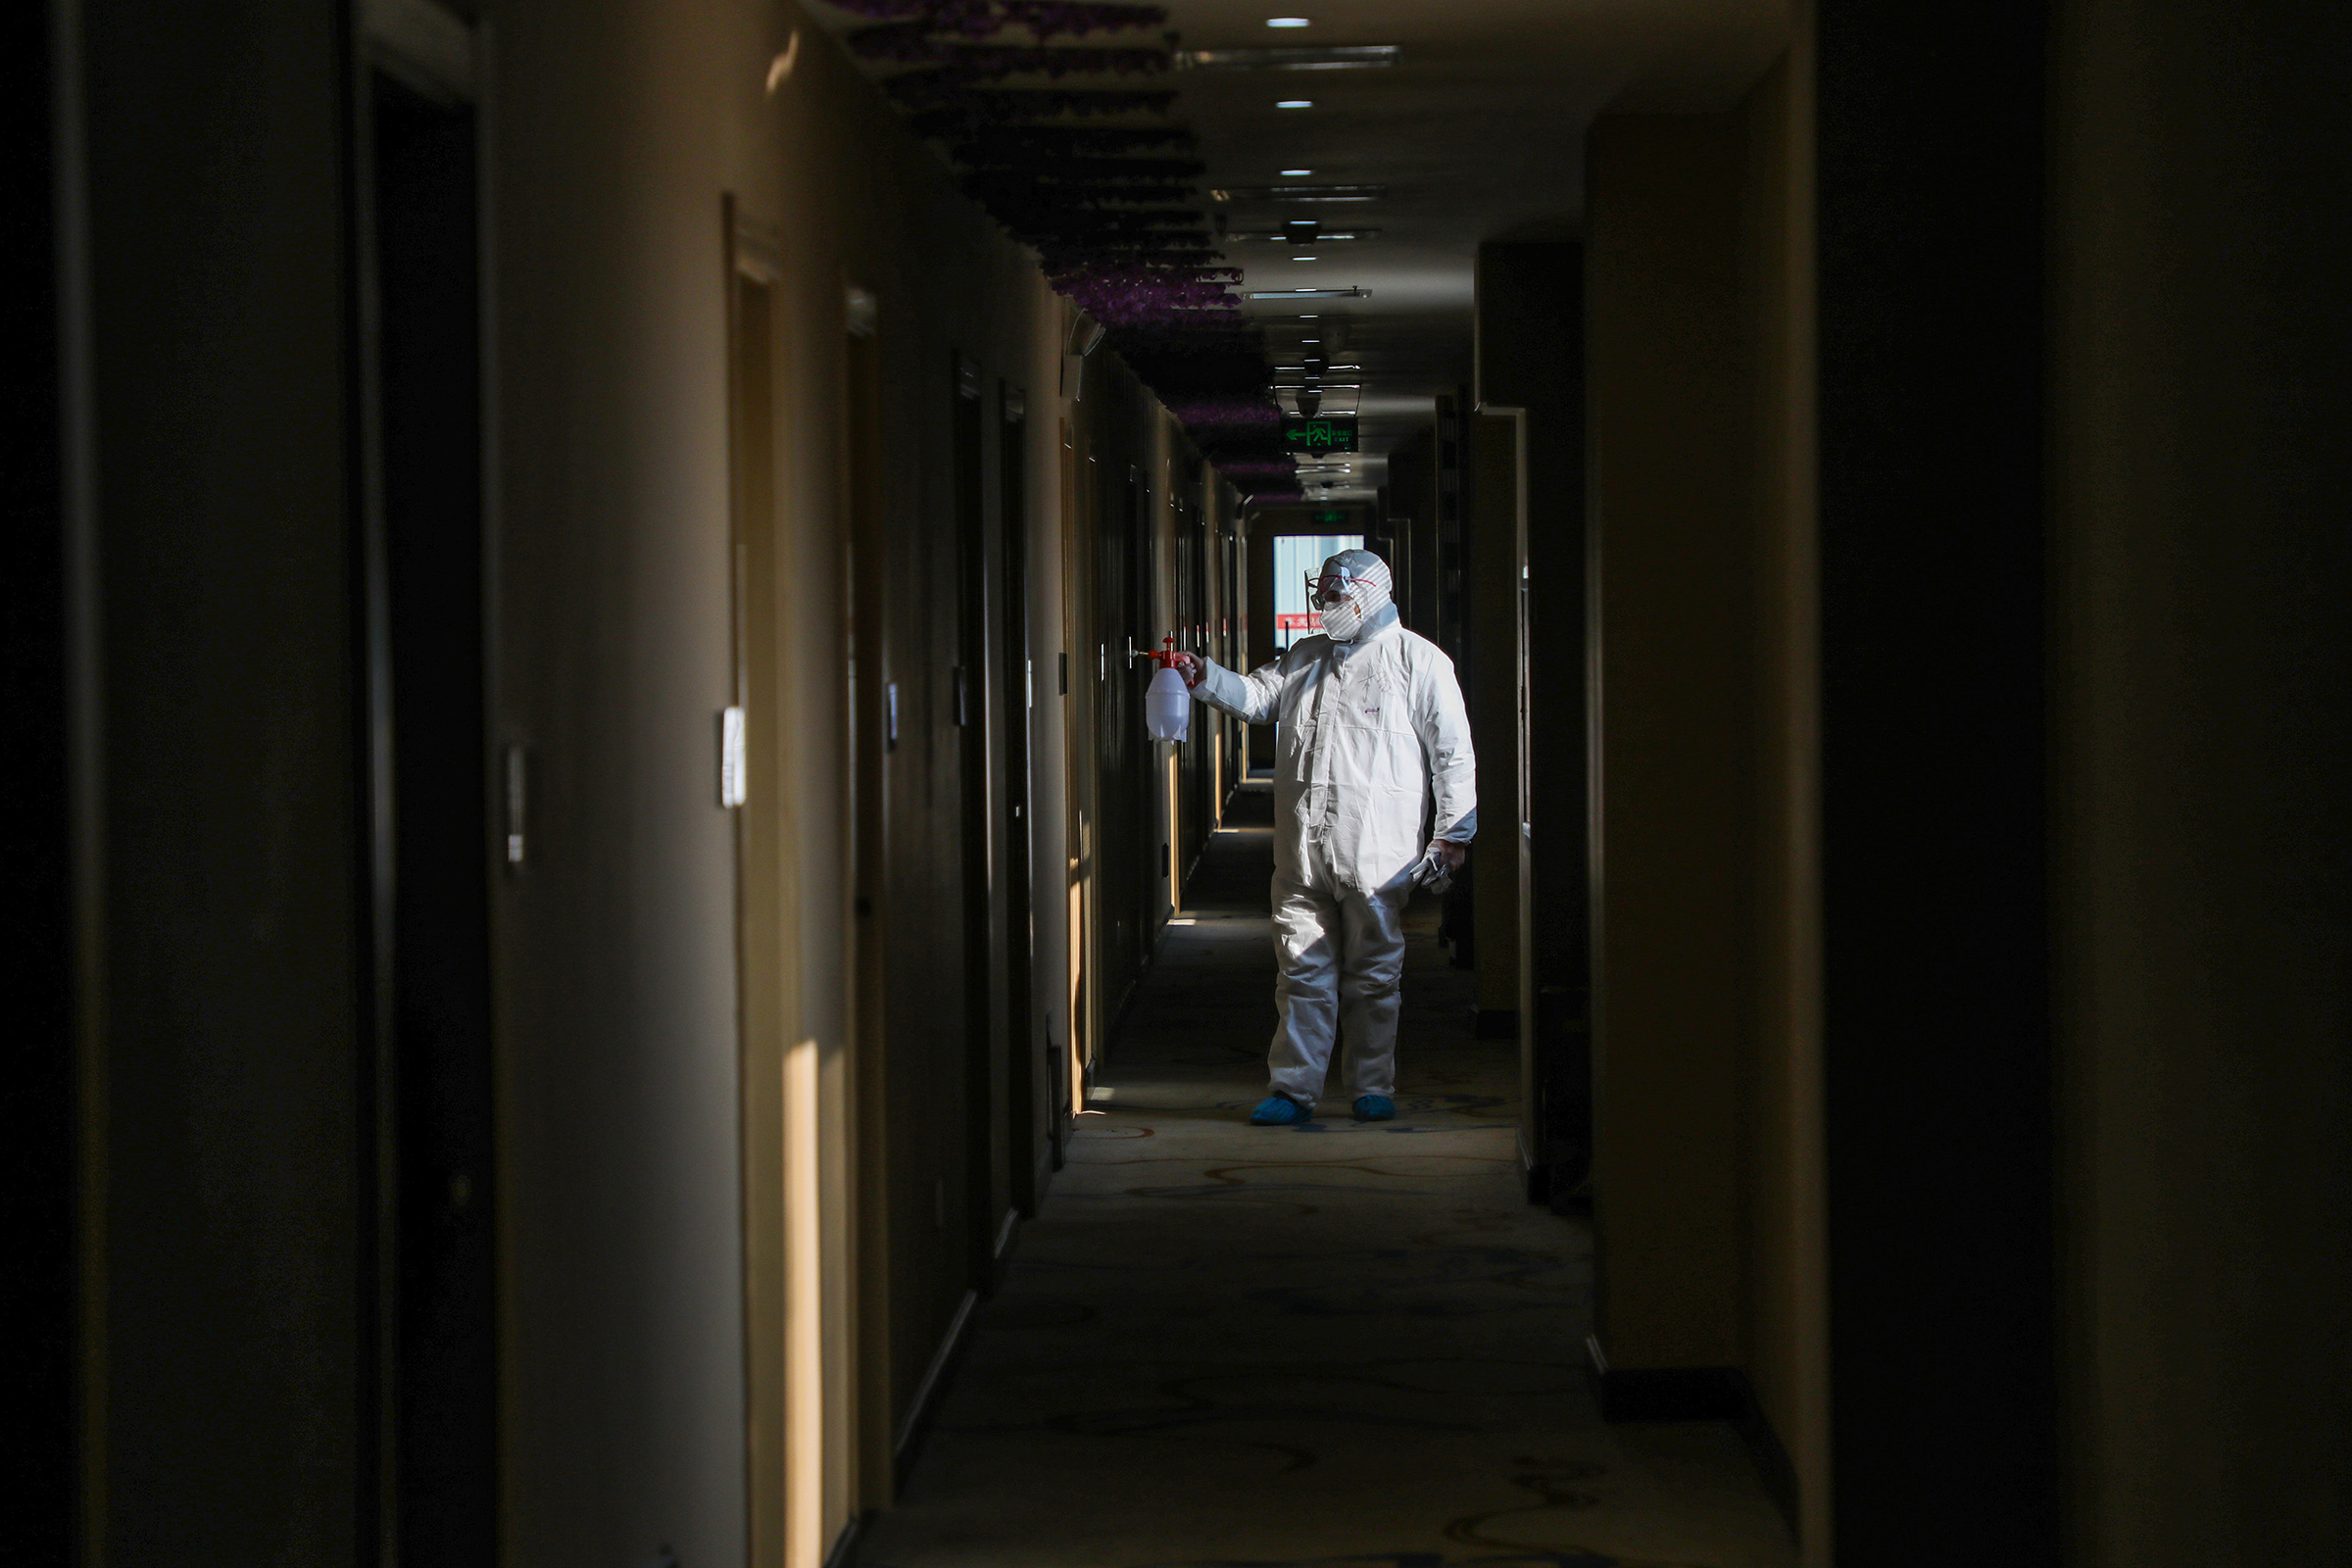 A medical worker disinfects a hotel converted into a quarantine zone in Wuhan, on Feb. 3 (AFP/GETTY IMAGES)